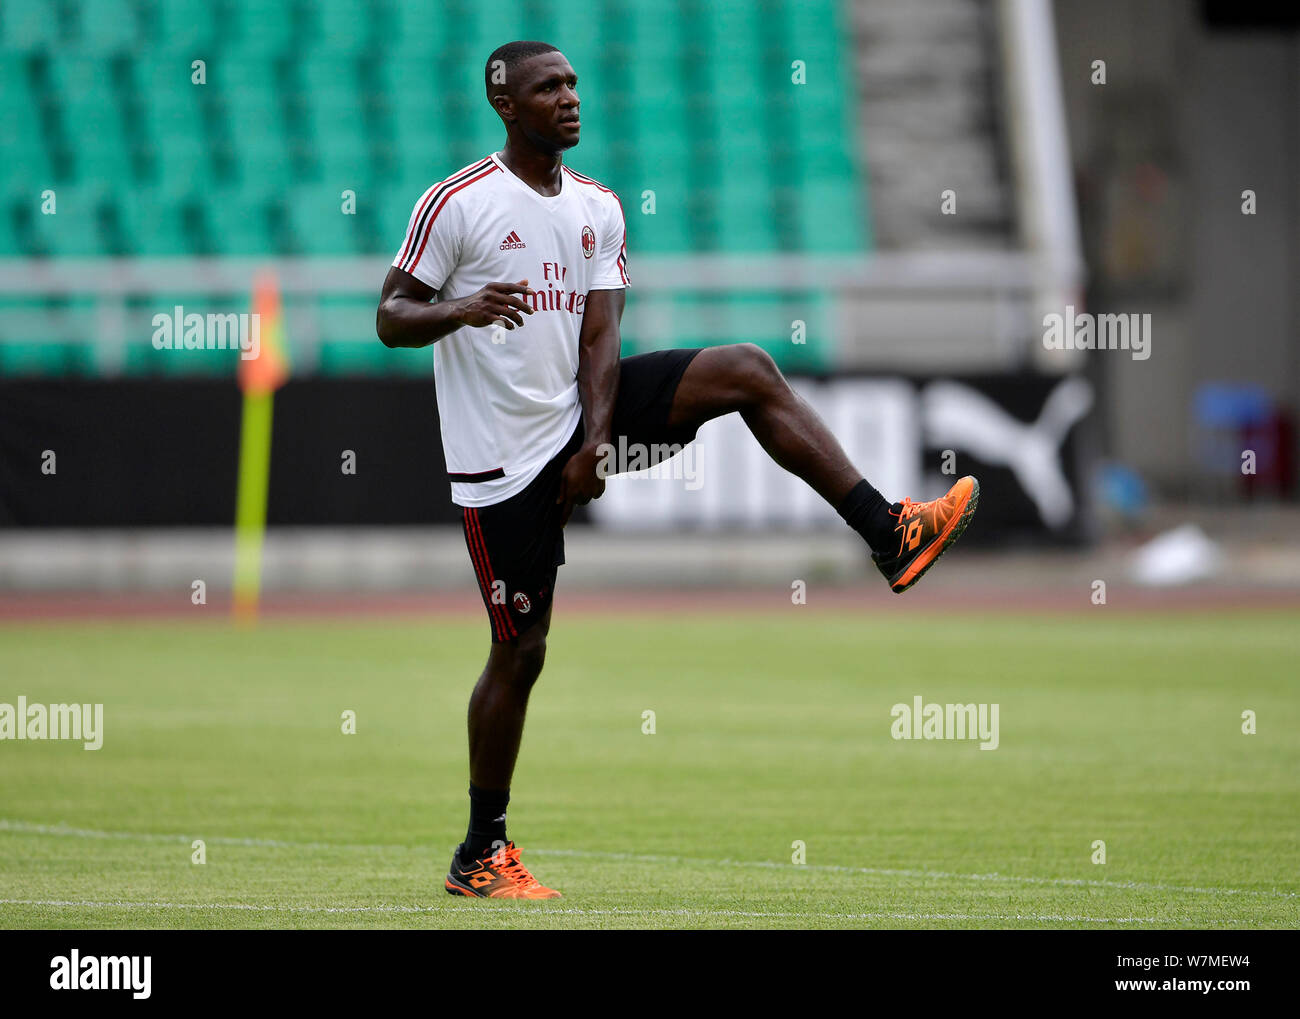 Cristian Zapata of AC Milan takes part in a training session for the 2017 International Champions Cup football match against Borussia Dortmund at the Stock Photo